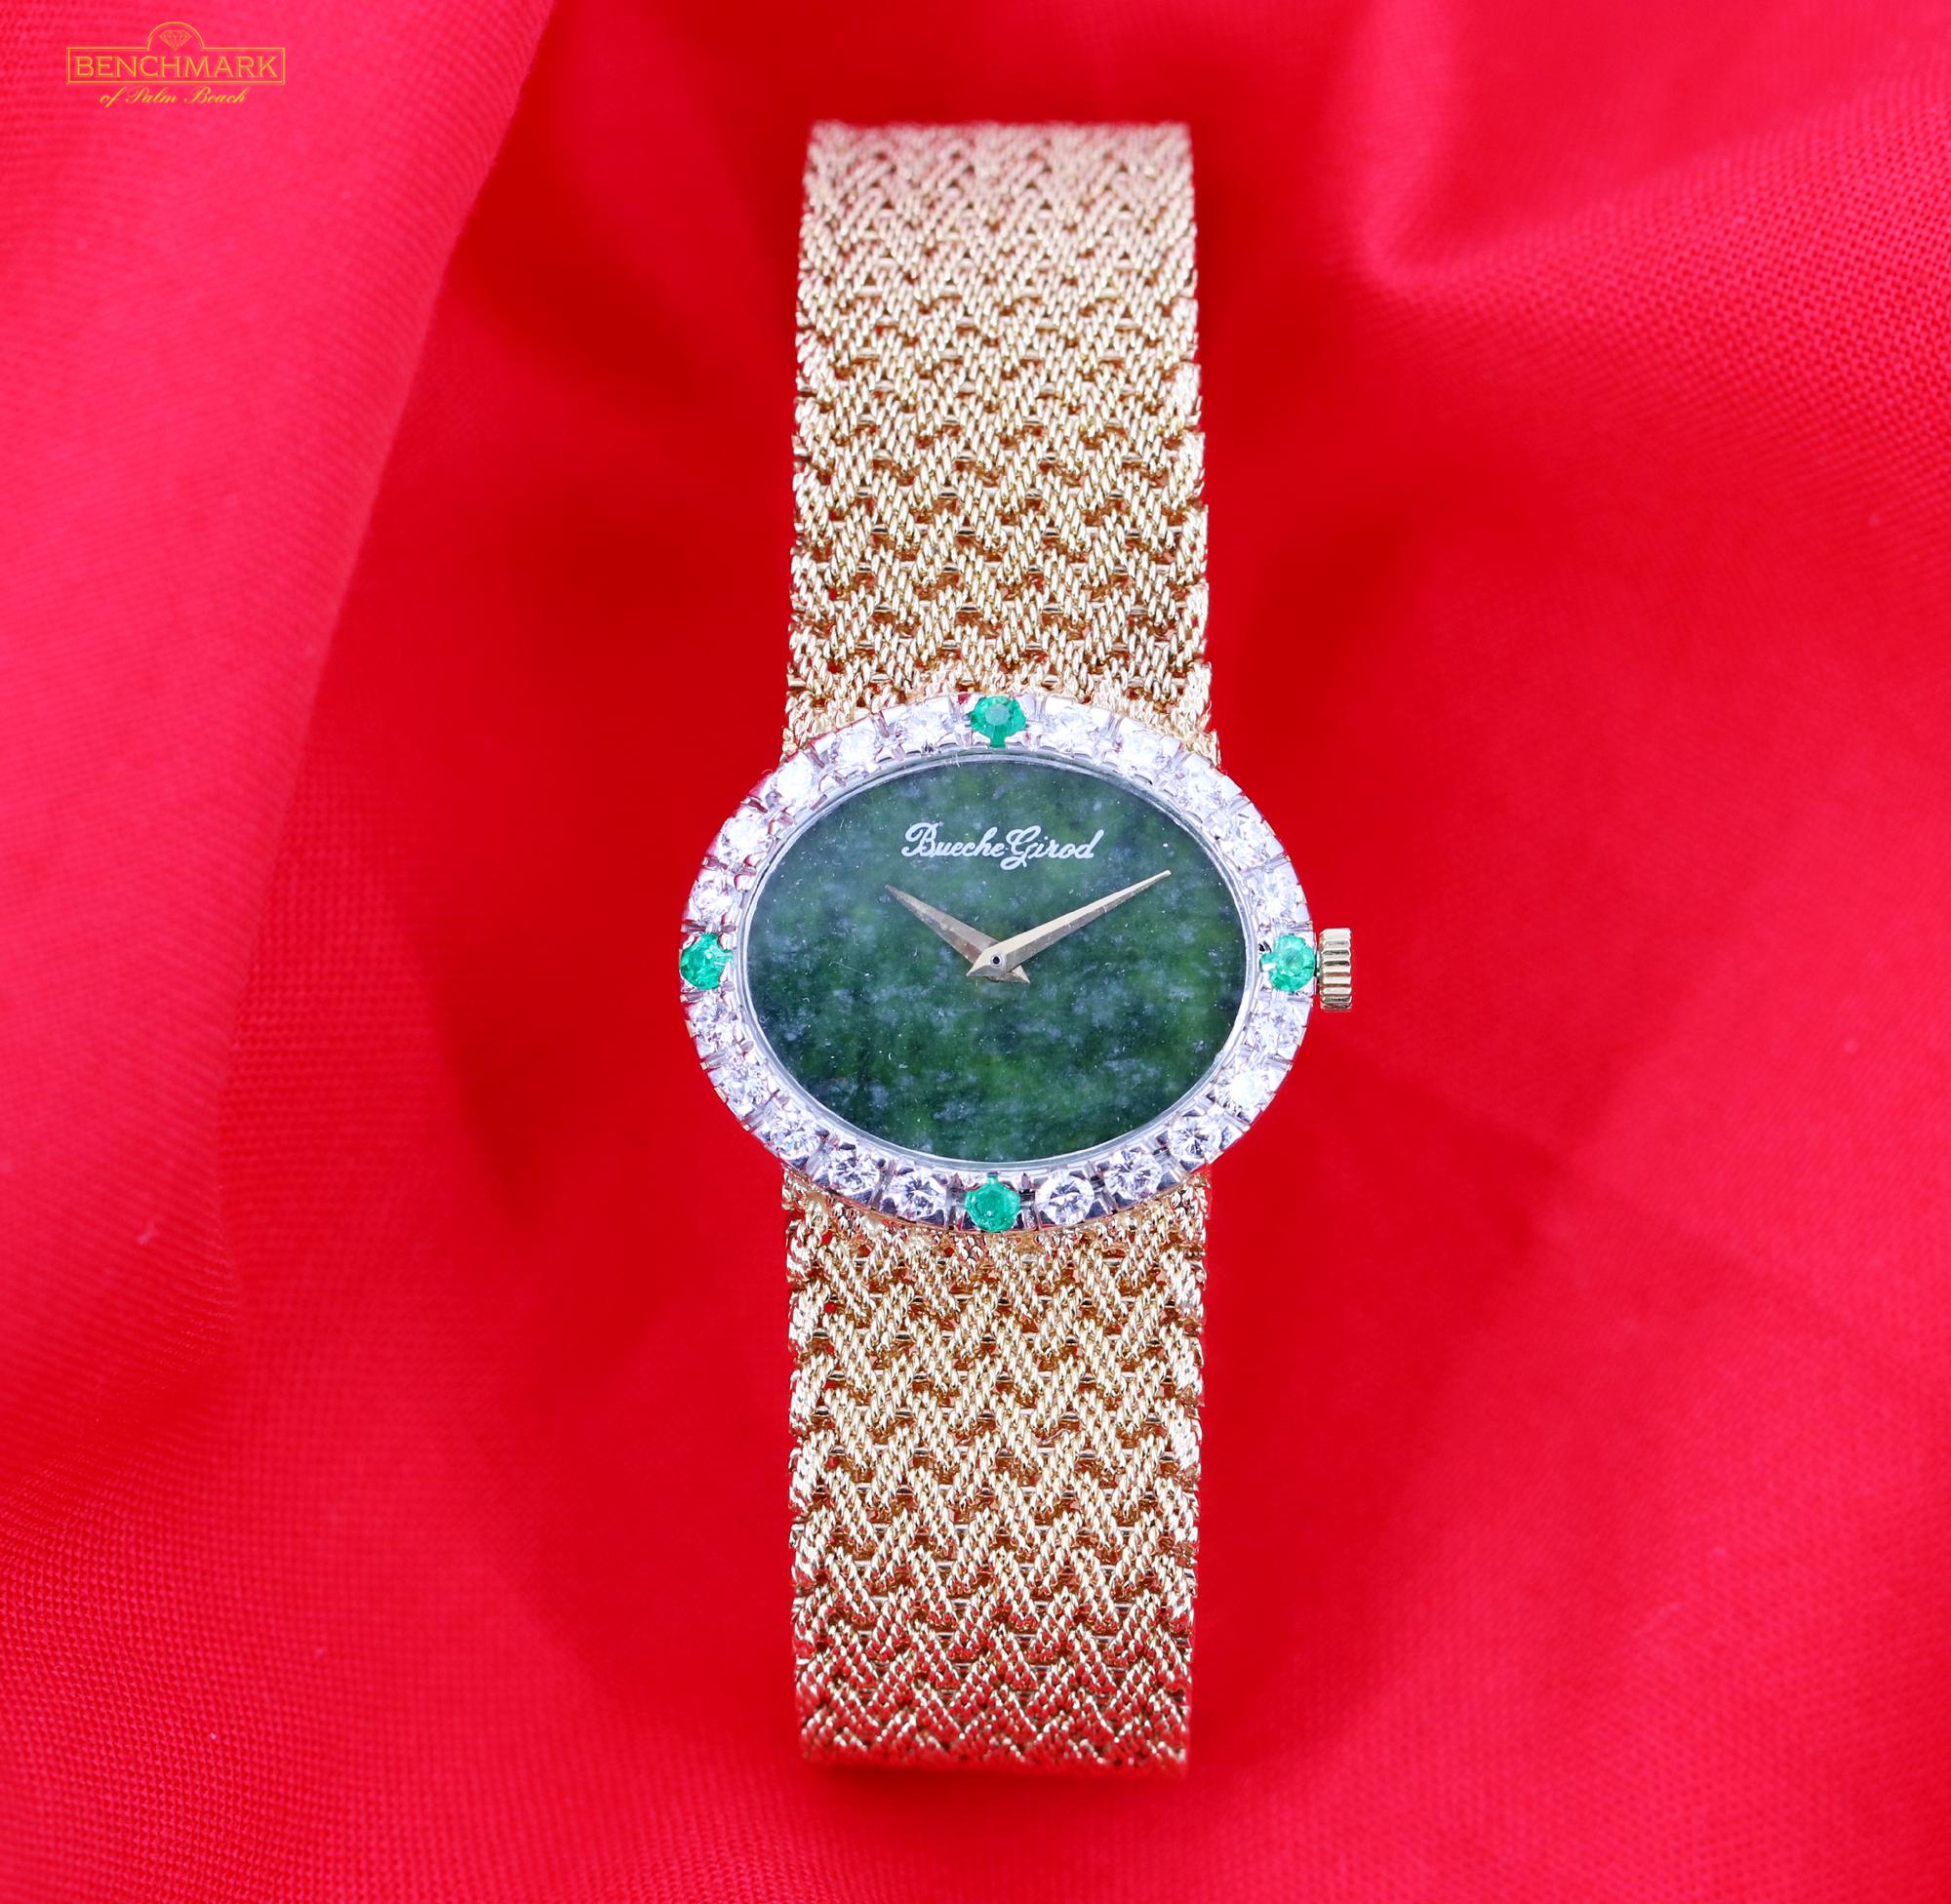 An 18K yellow gold wristwatch centered around a spinach green jade dial, with a bright diamond bezel, with emerald markers at the 12, 3, 6, and 9 o'clock positions. The 20 round brilliant cut diamonds weigh 1ct total approximate weight. With a case